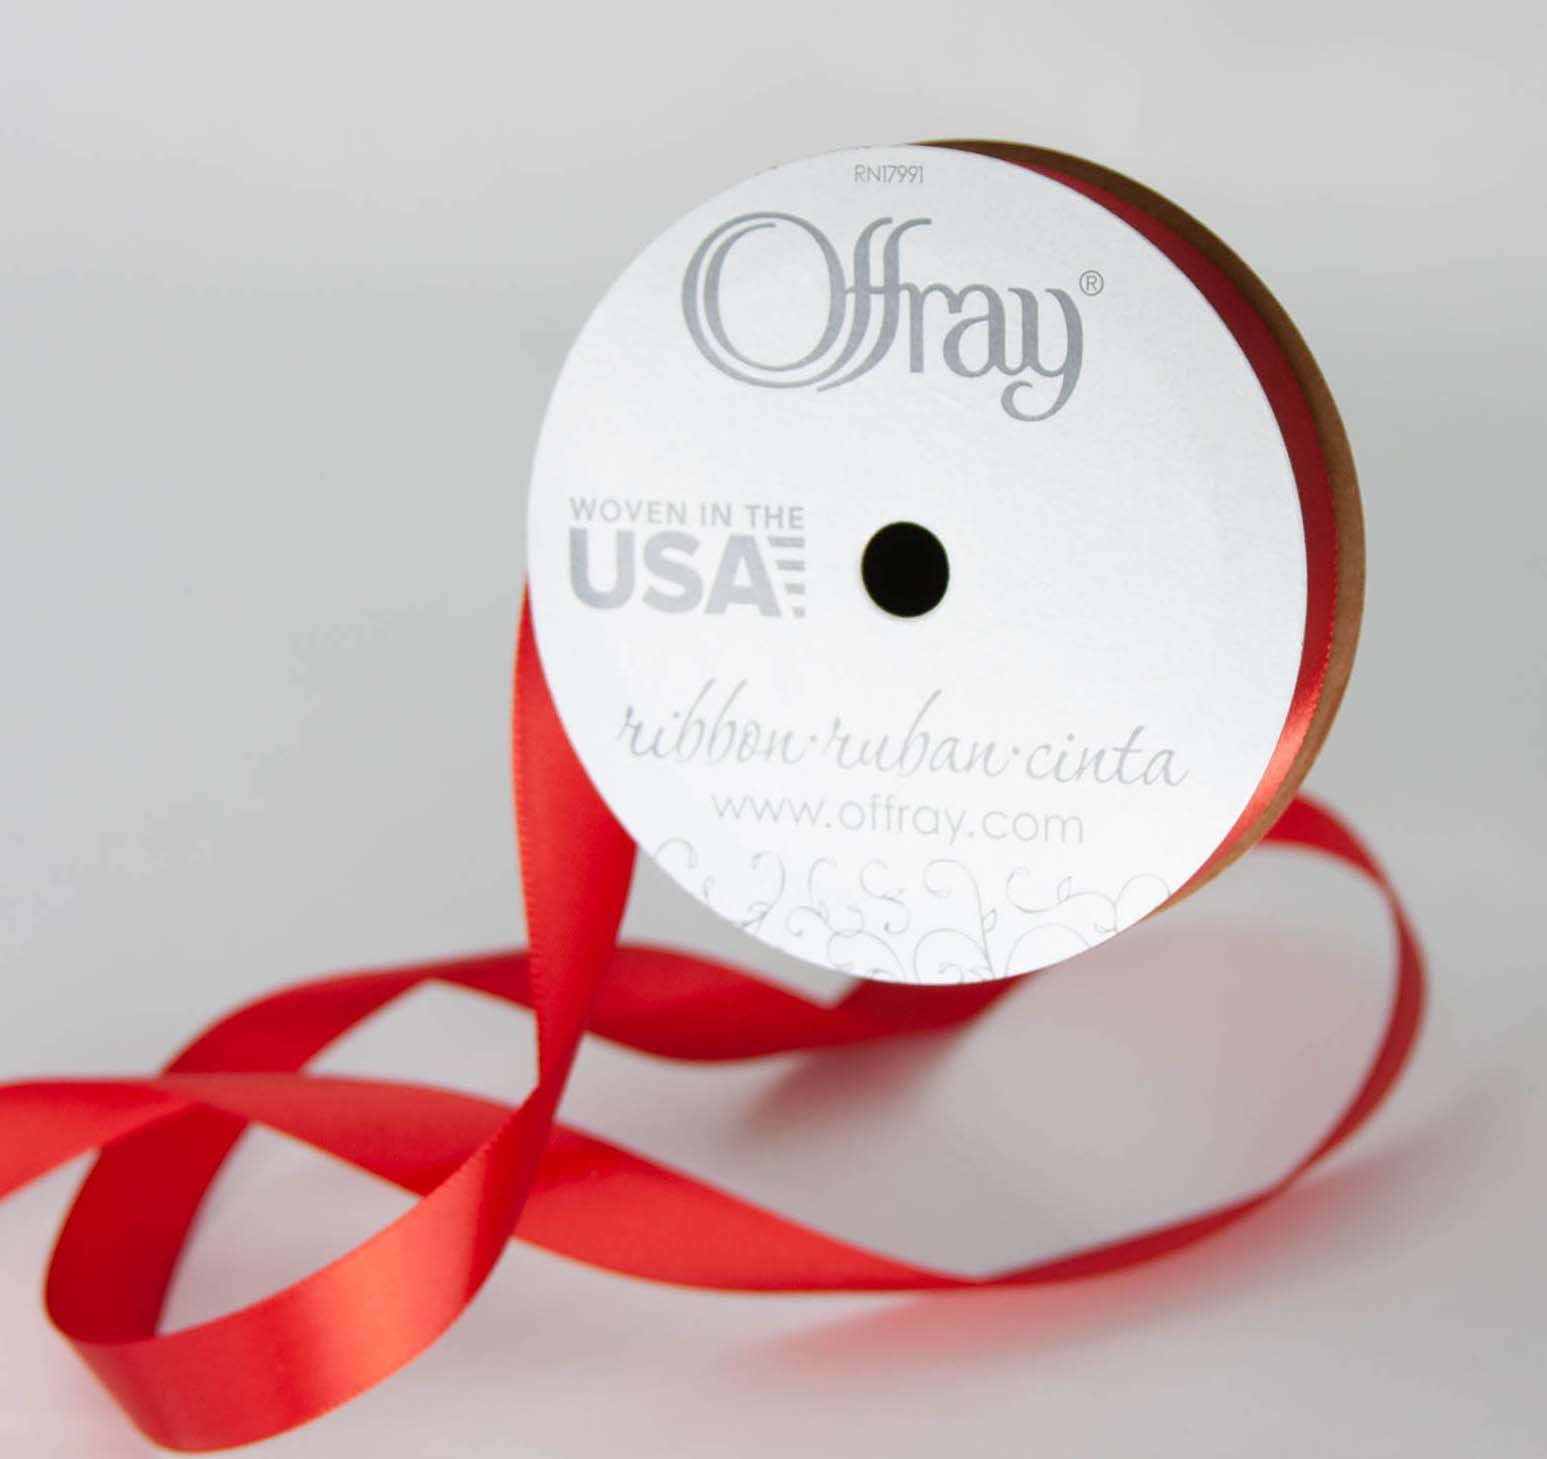 Brown Ribbon, Offray Russet SF Satin Ribbon 5/8 inch wide x 10 yards, 583